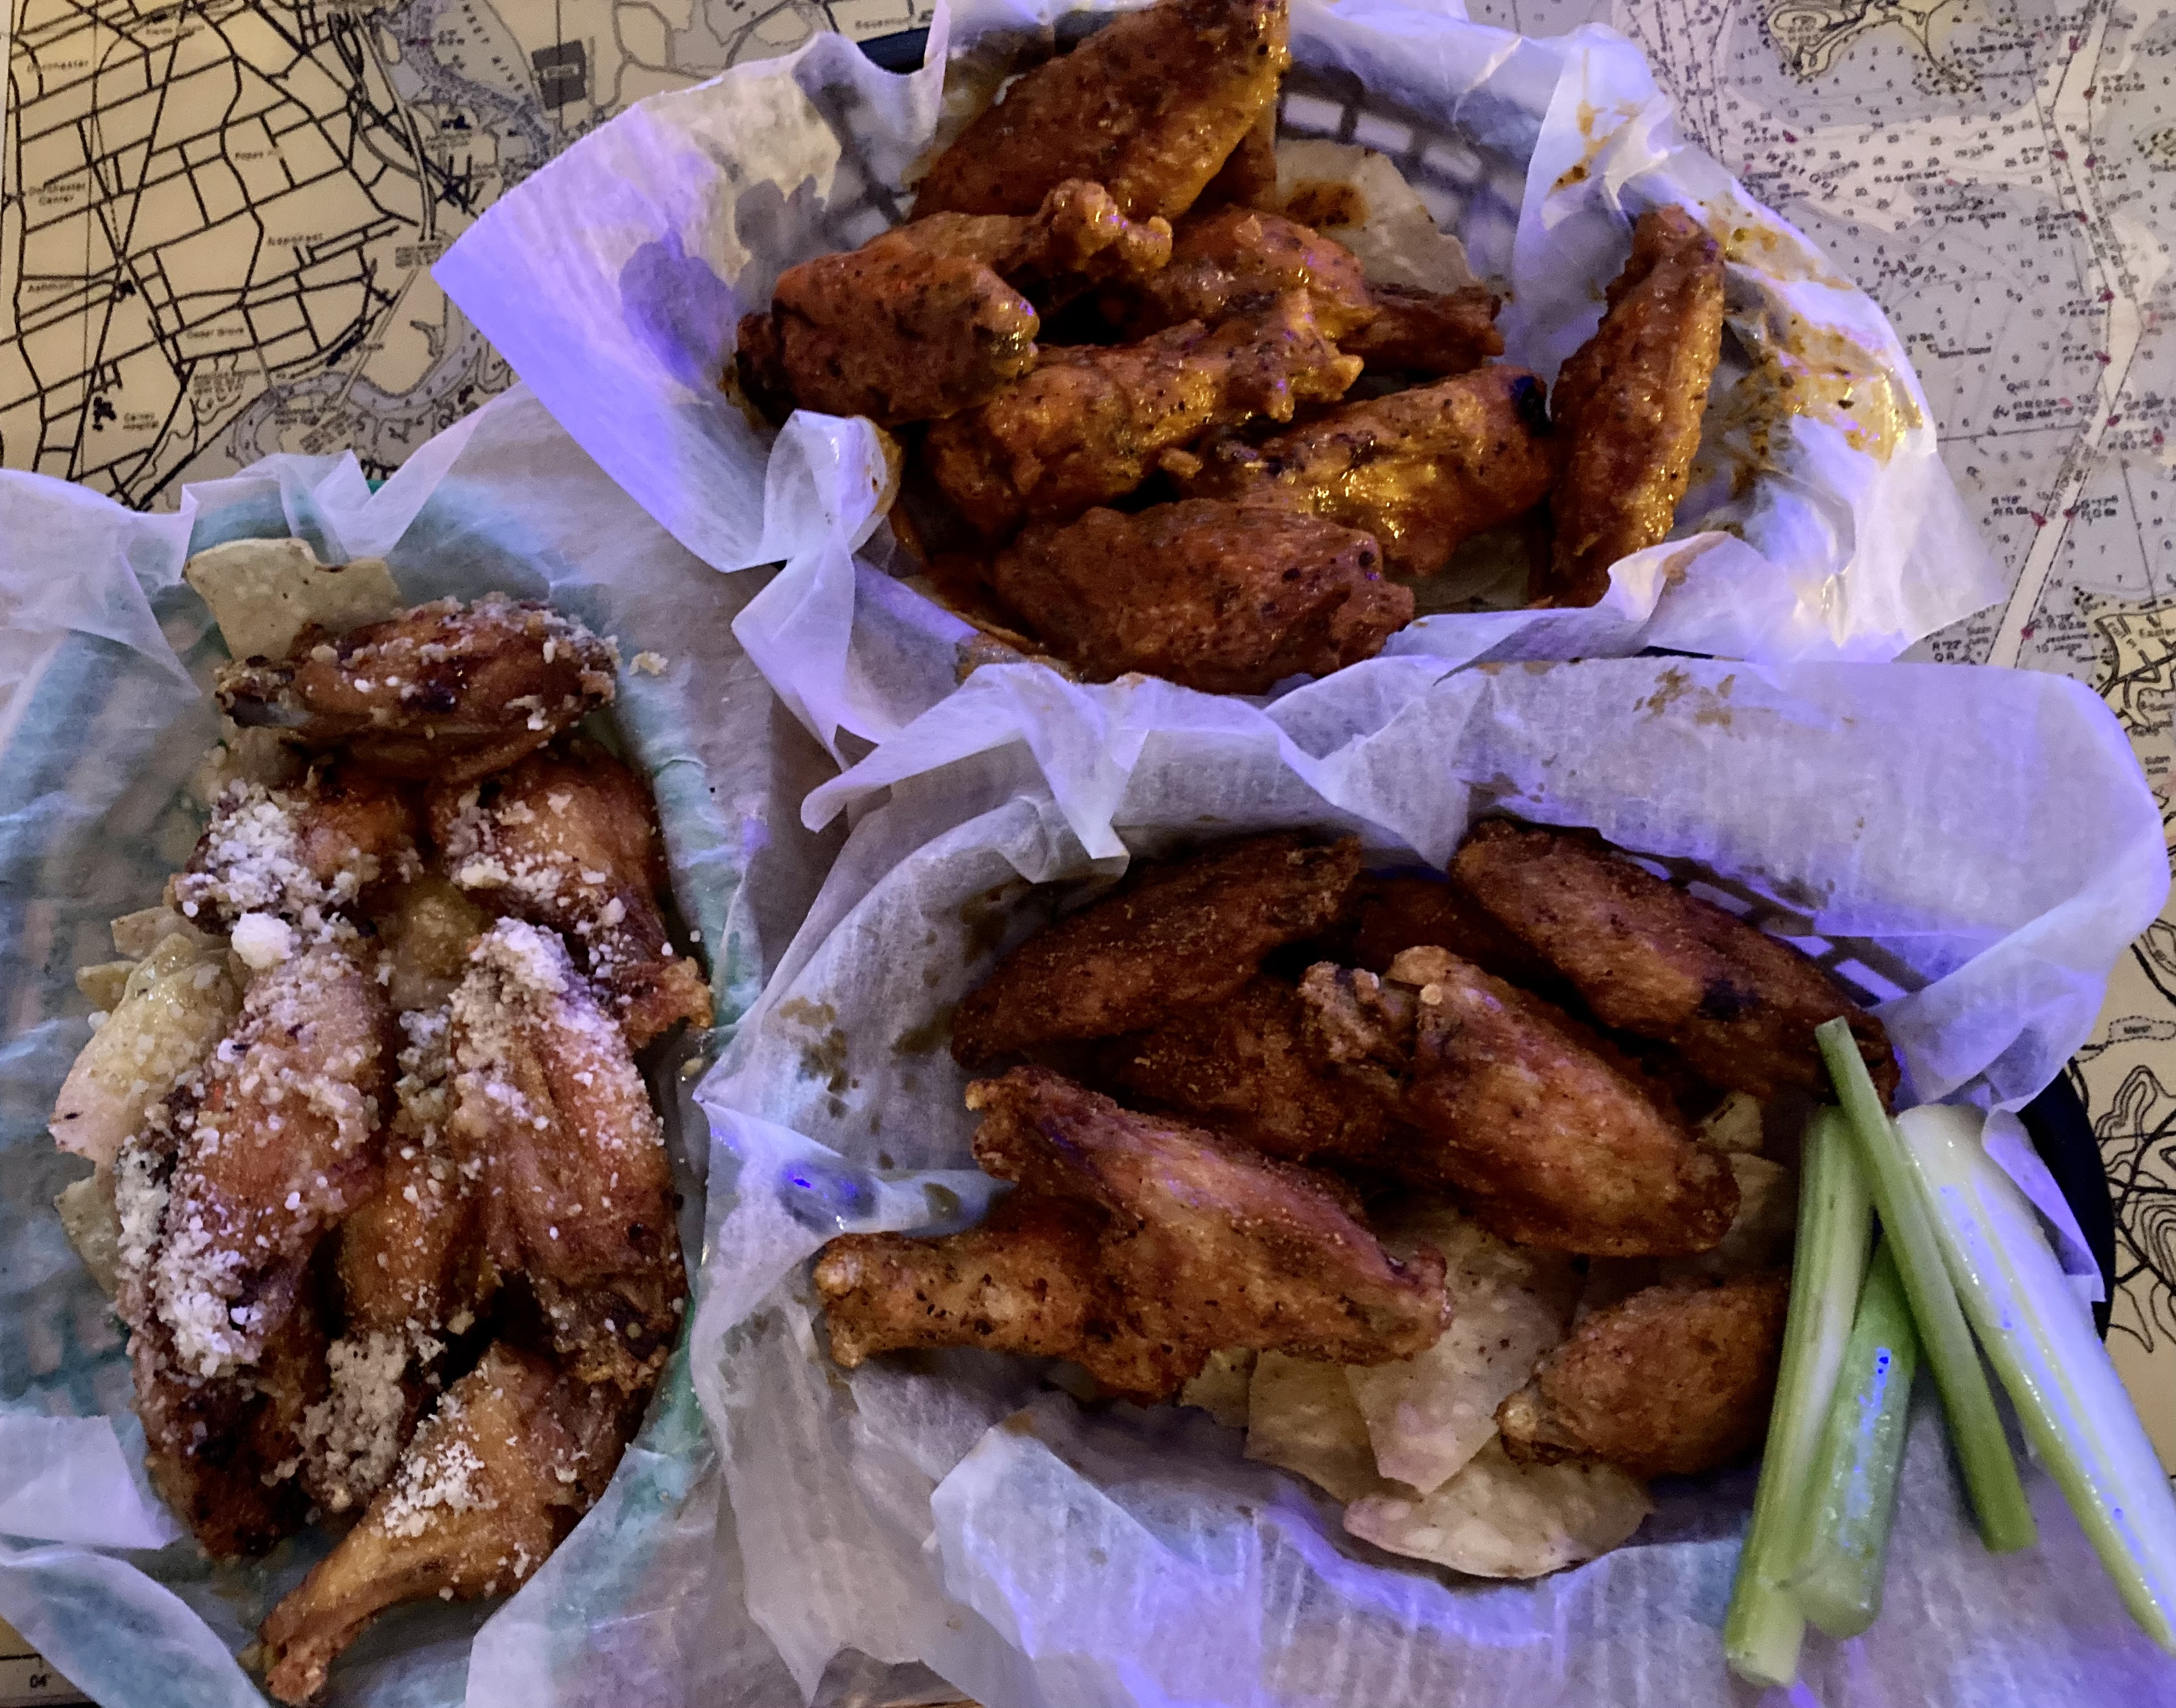 Best Wings in Greater Cleveland: Skinny's Bar & Grille among top finishers  in readers' poll (photos) 